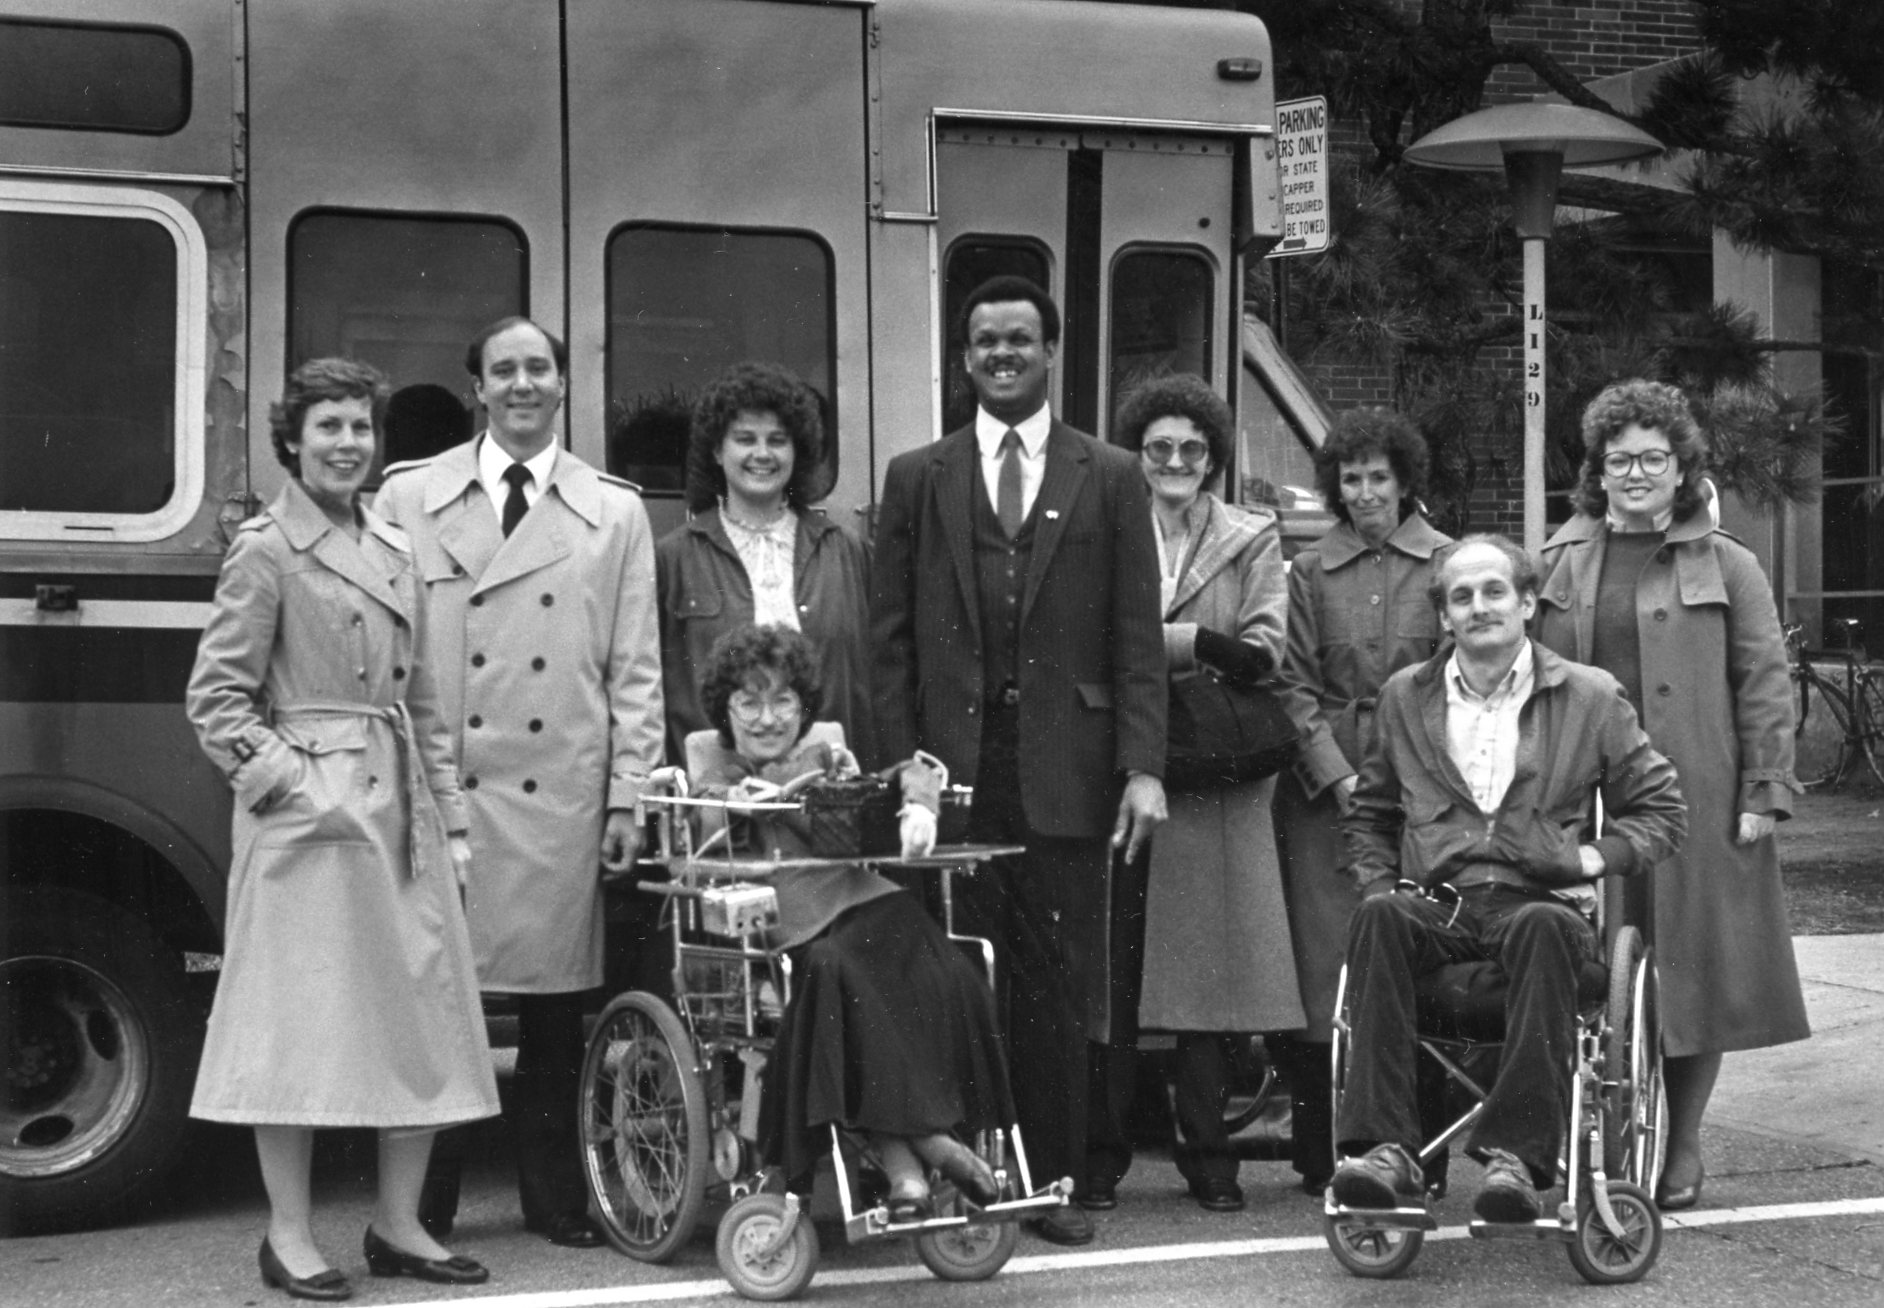 HSP staff in front of first accessible van